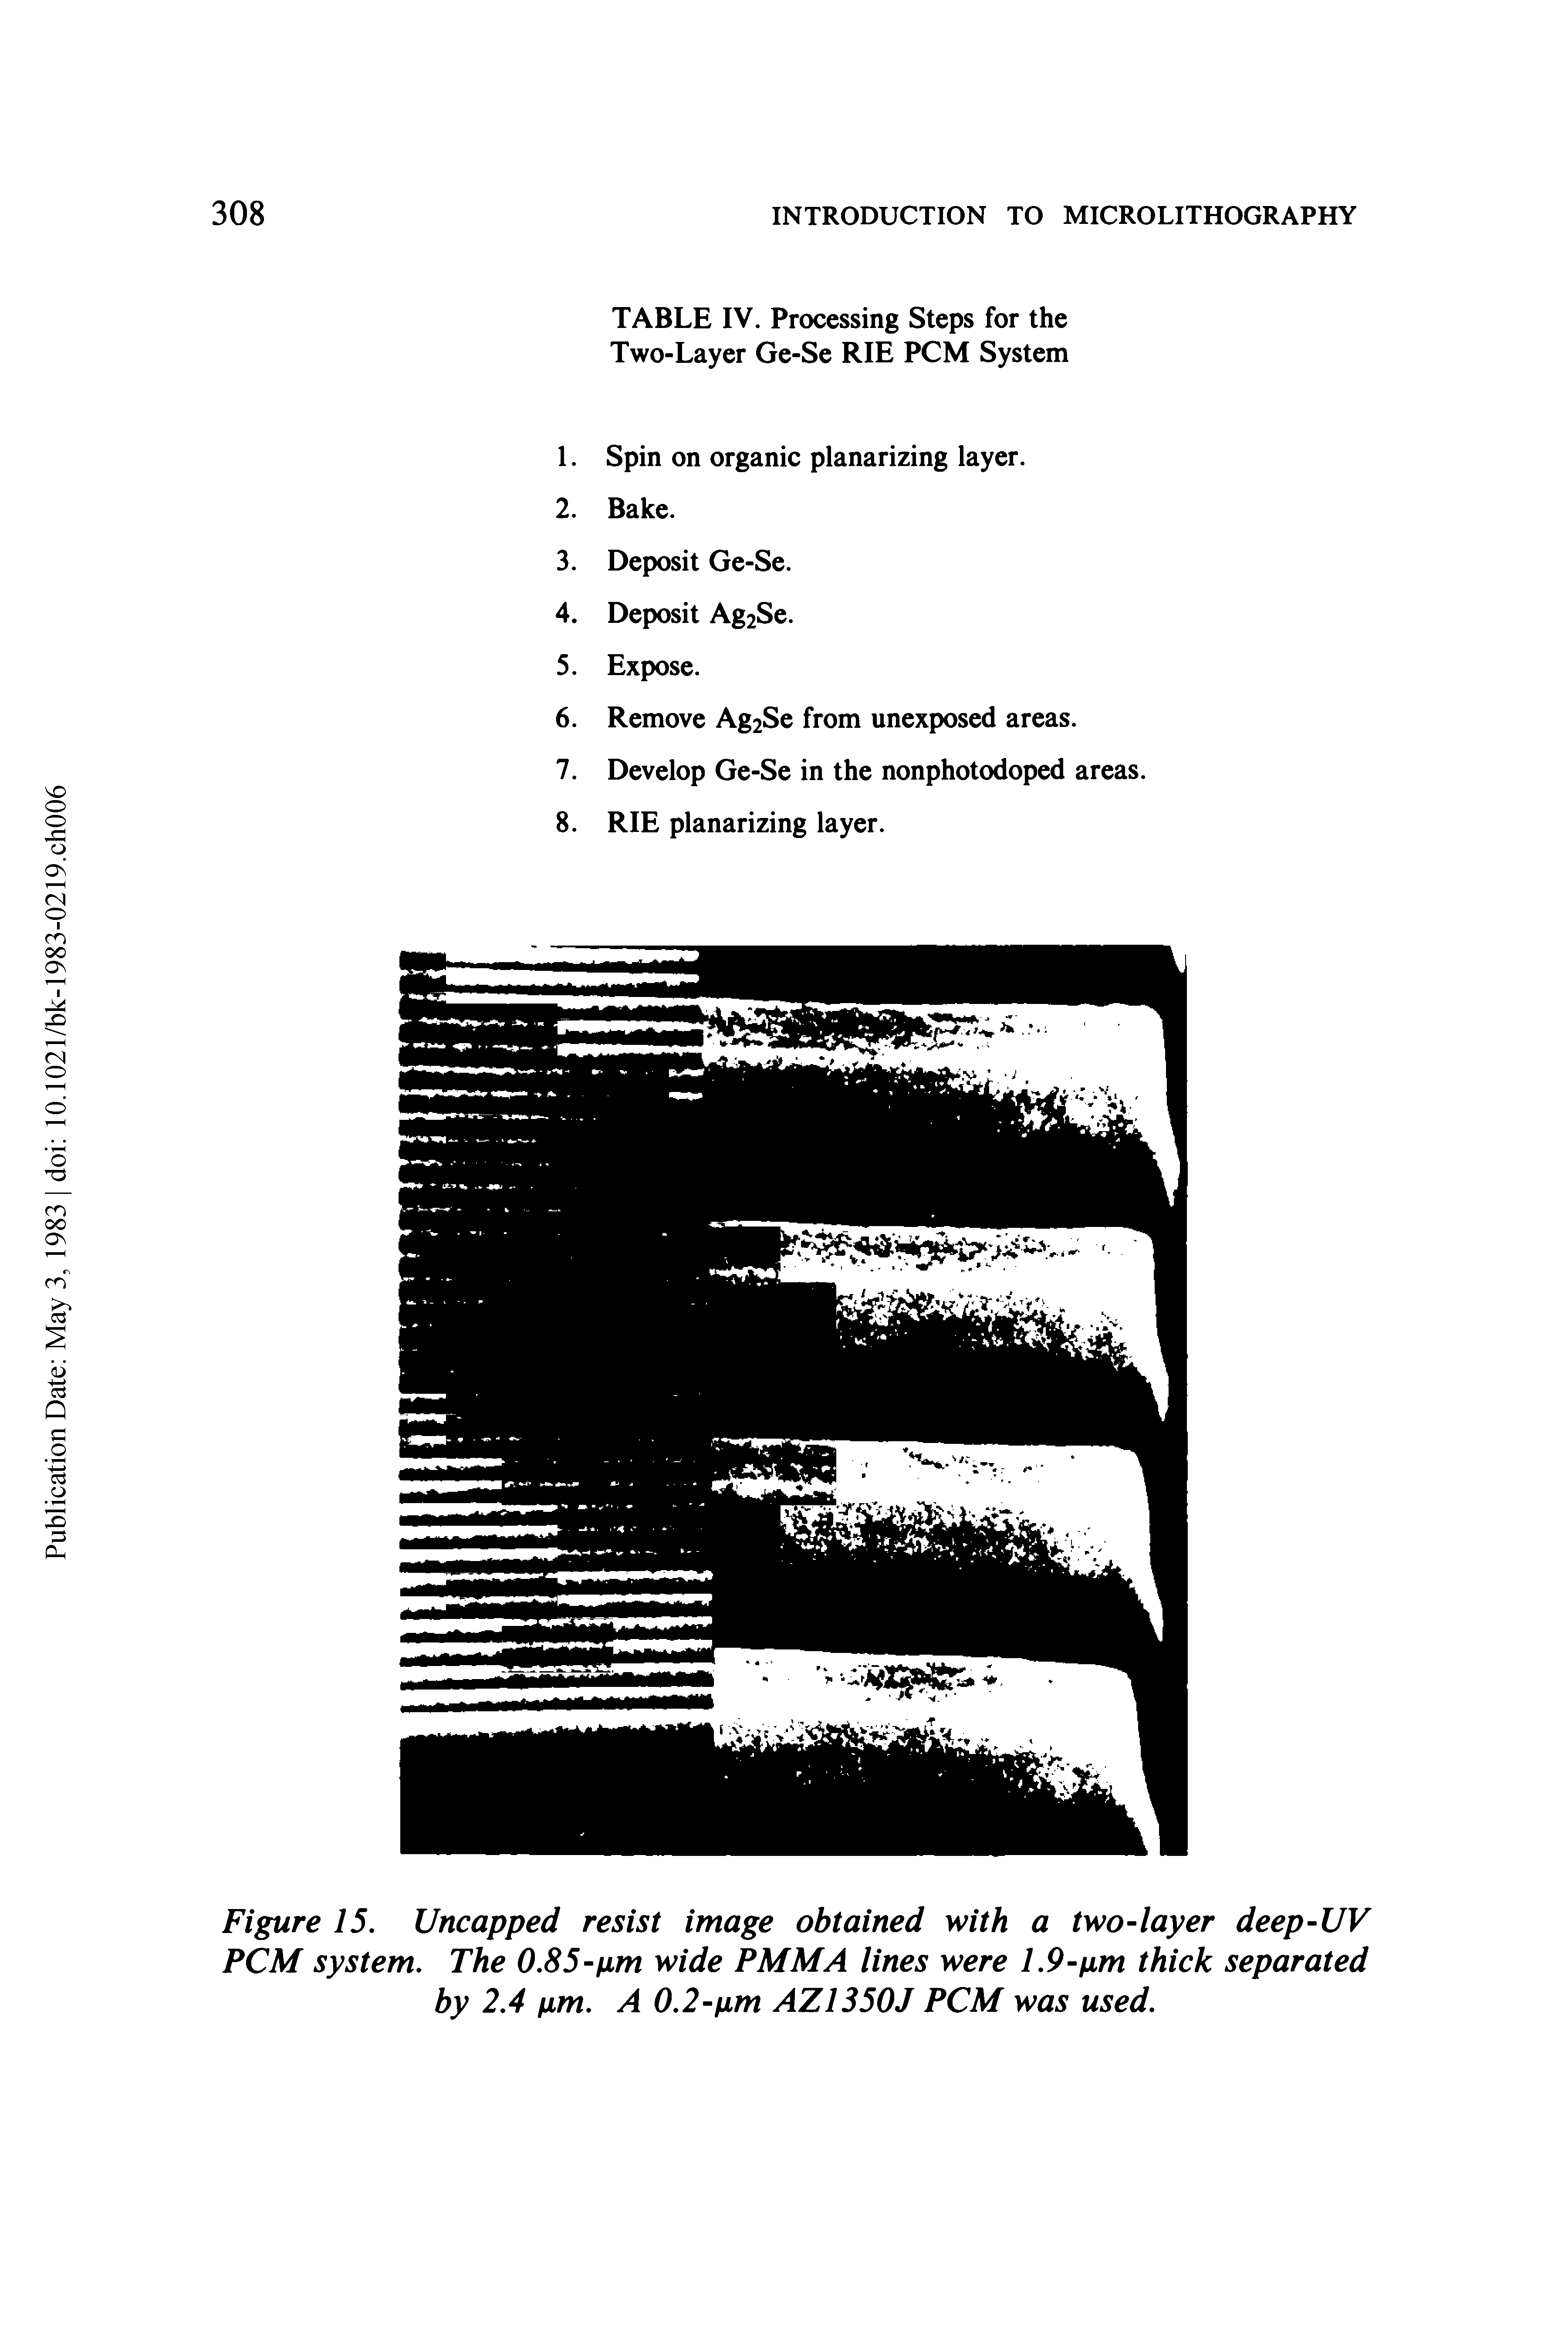 Figure 15. Uncapped resist image obtained with a two-layer deep-UV PCM system. The 0.85-um wide PMMA lines were 1.9-fim thick separated by 2.4 ixm. A 0.2-um AZ1350J PCM was used.